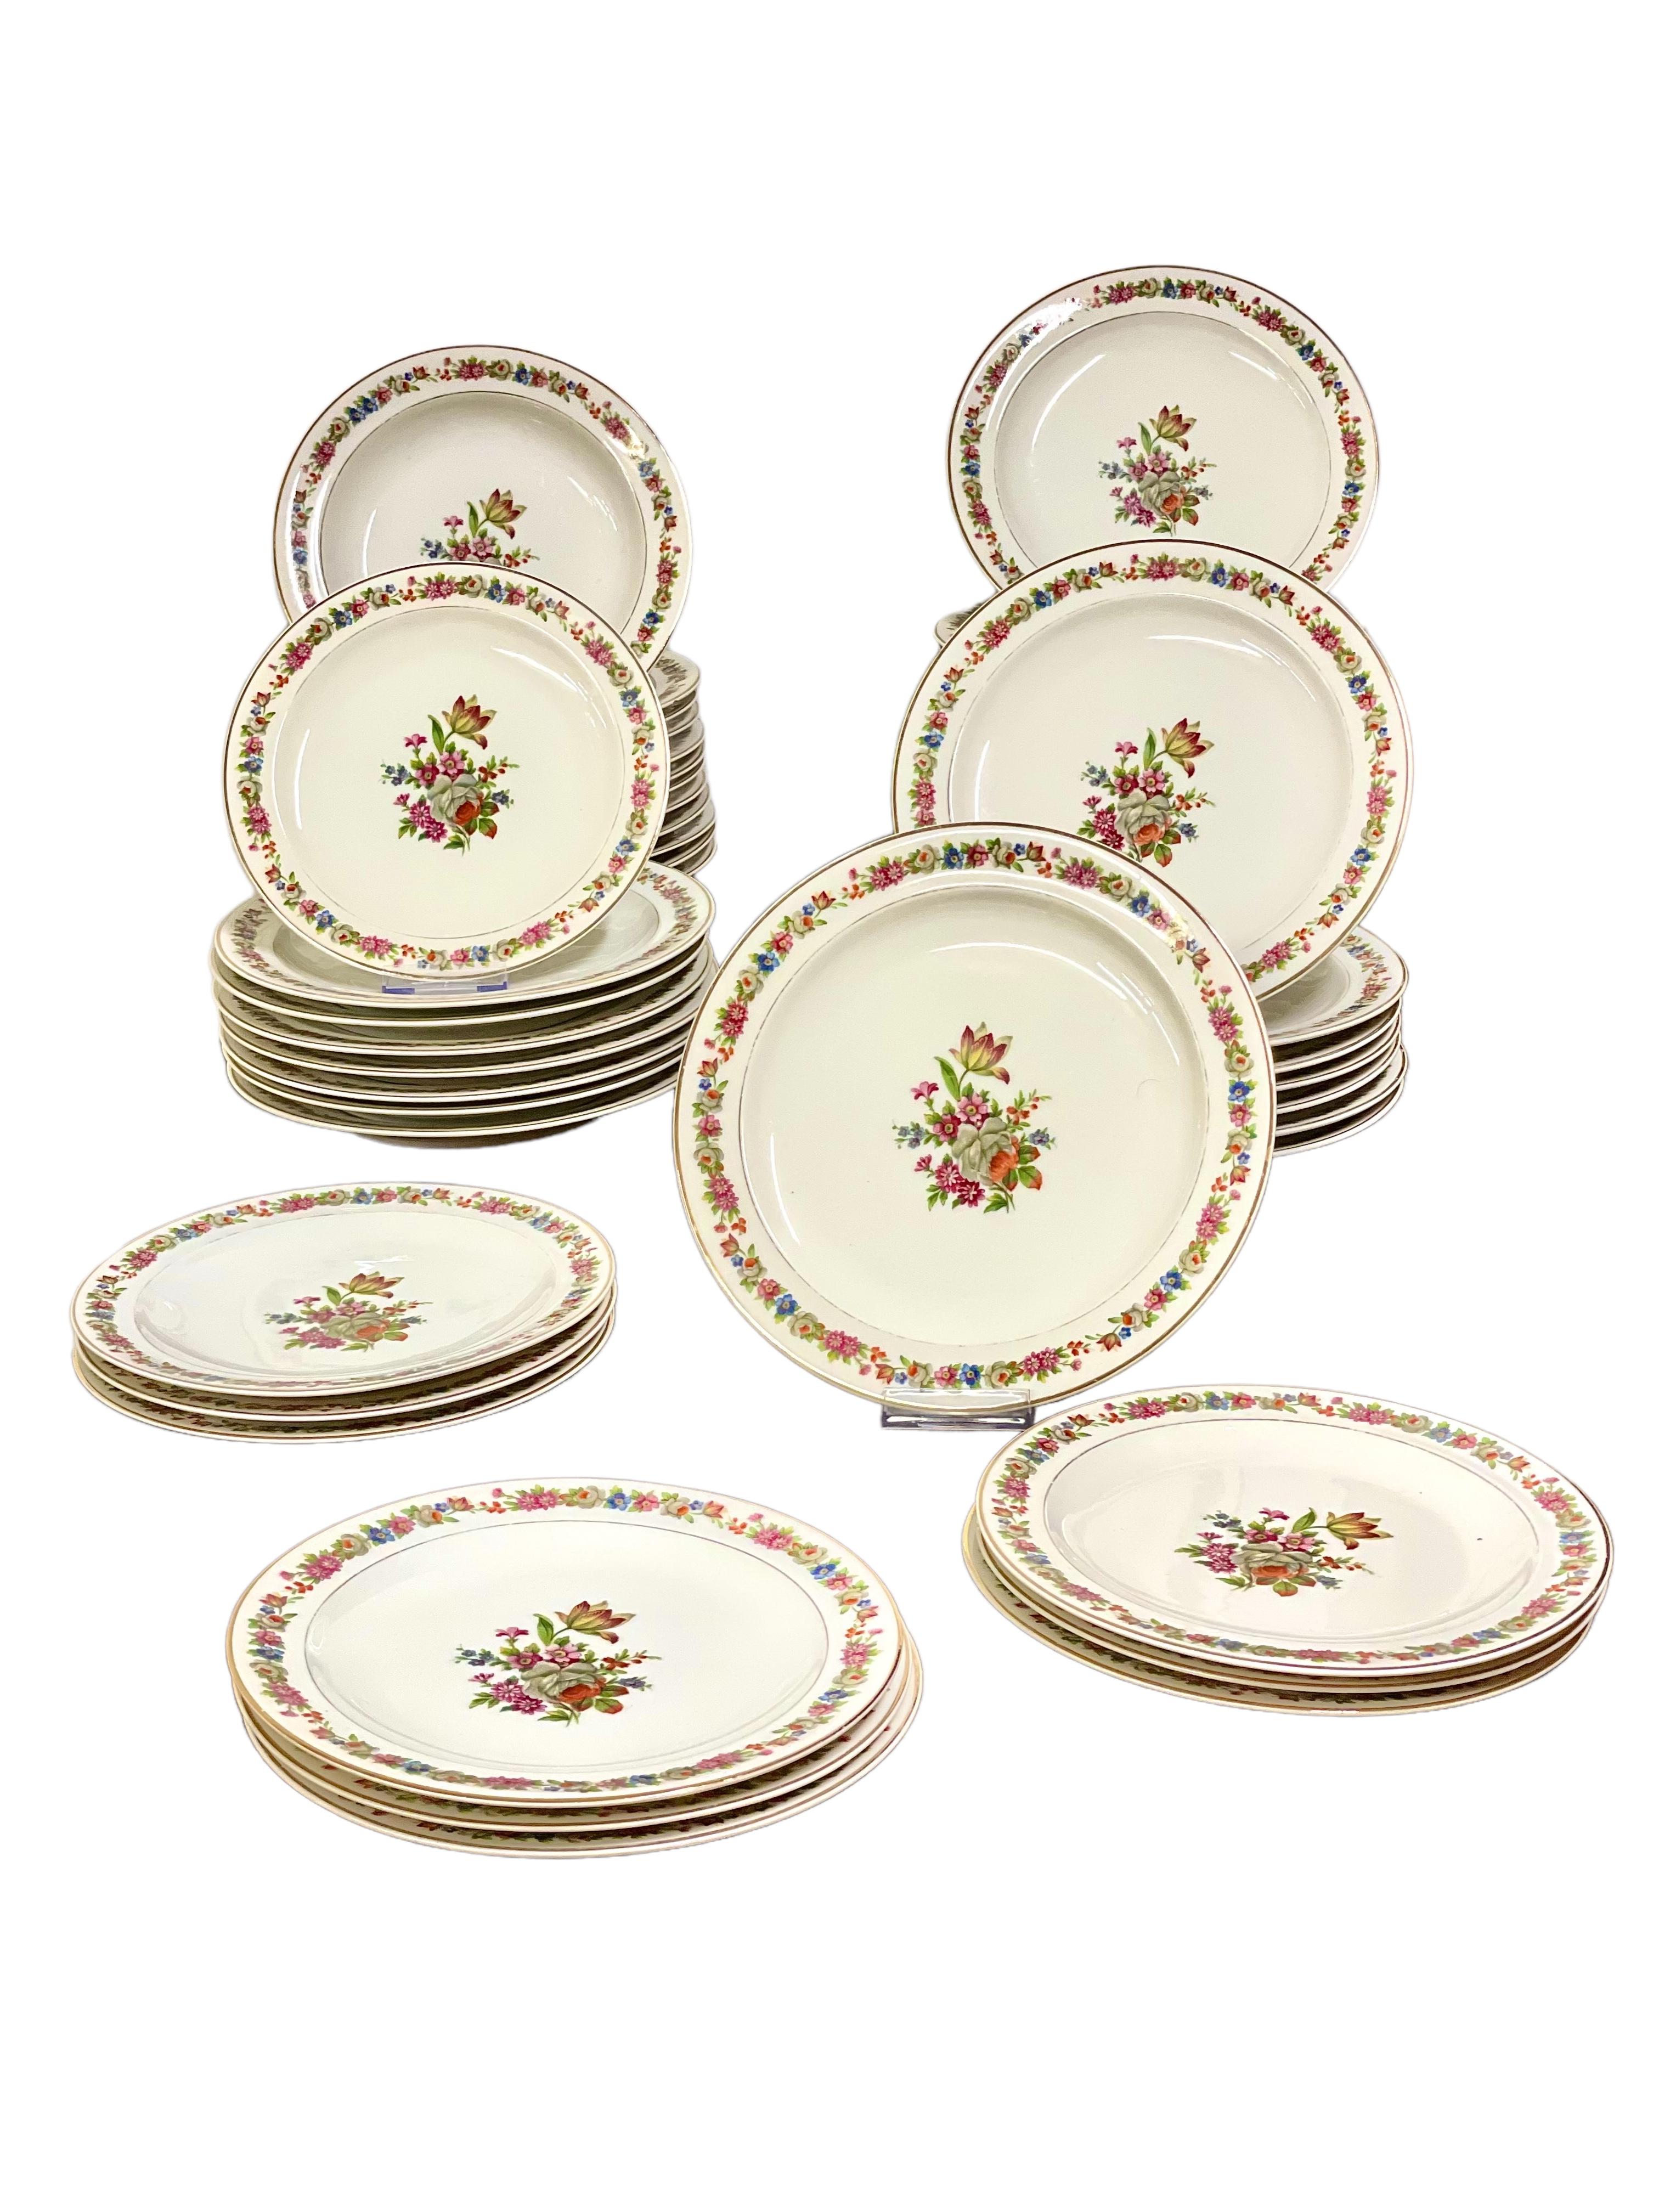 A fine dinner service in Limoges porcelain, dating from around the 1920s and made by renowned porcelain manufacturer Raynaud & Cie. Comprising an assortment of dinner and serving ware, there are 64 pieces in total, each featuring an exquisite